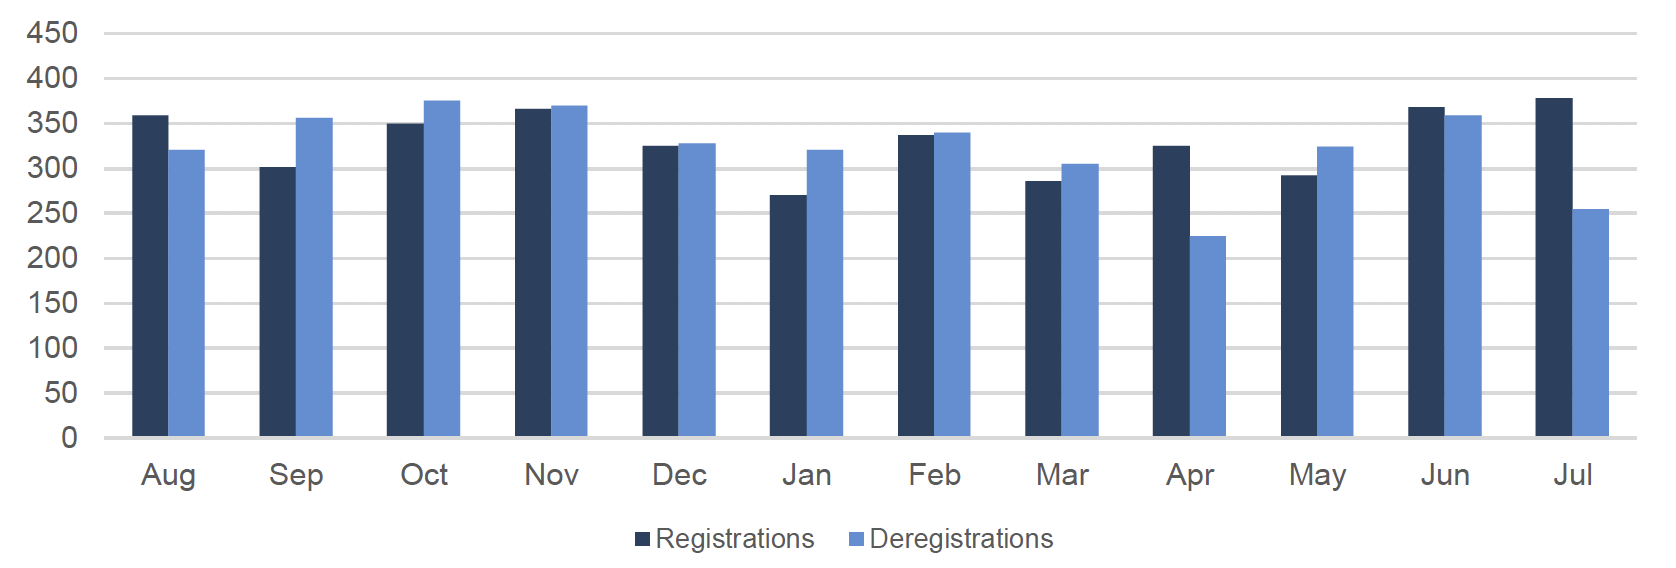 This shows the number of child protection registrations and deregistrations by month in 2019-20